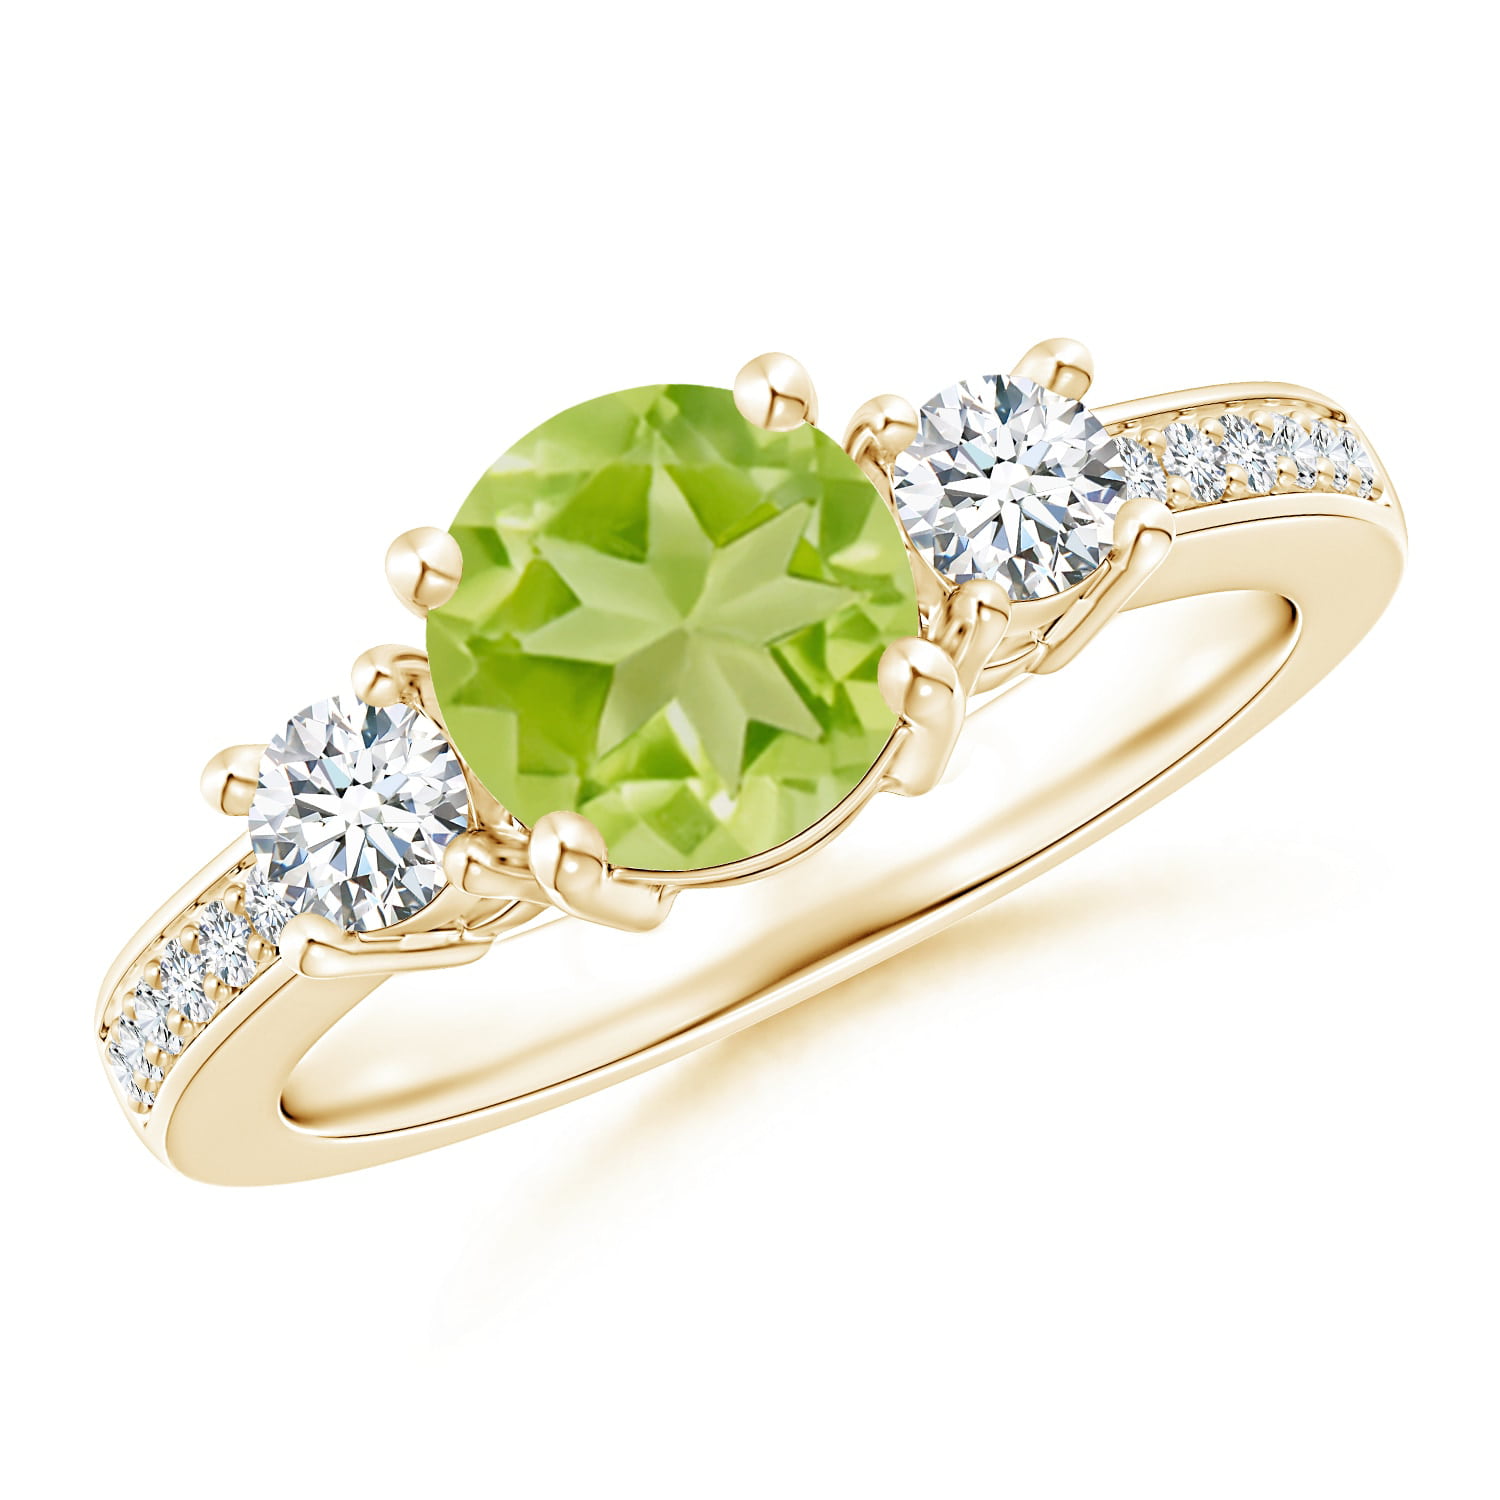 Colored Gemstones Gemstone Sterling Silver and 14K Peridot Diamond Ring Size 7